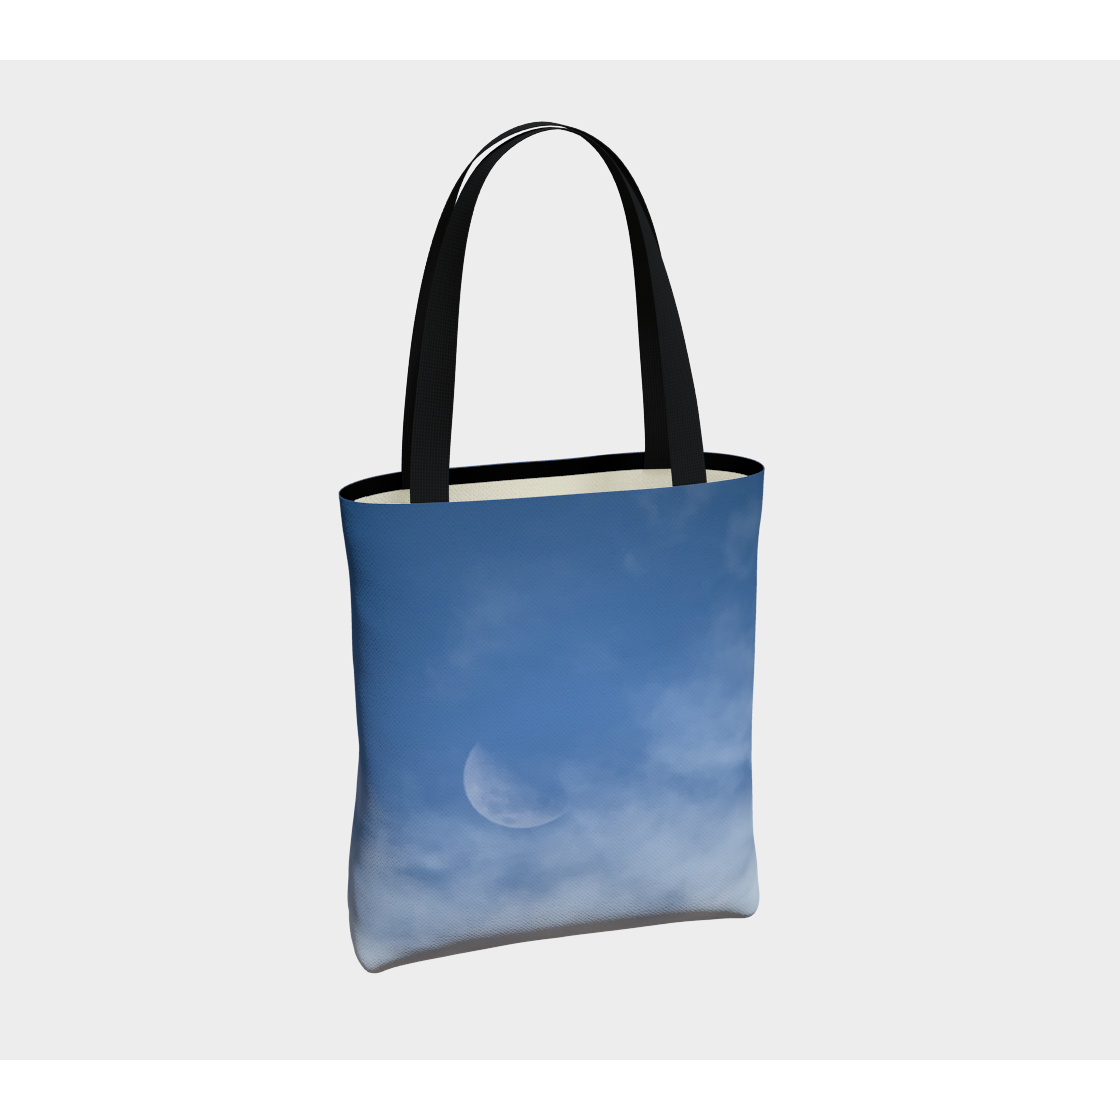 Tote Bag for Women with: Half Moon Cloudy Sky Design, Light Inside